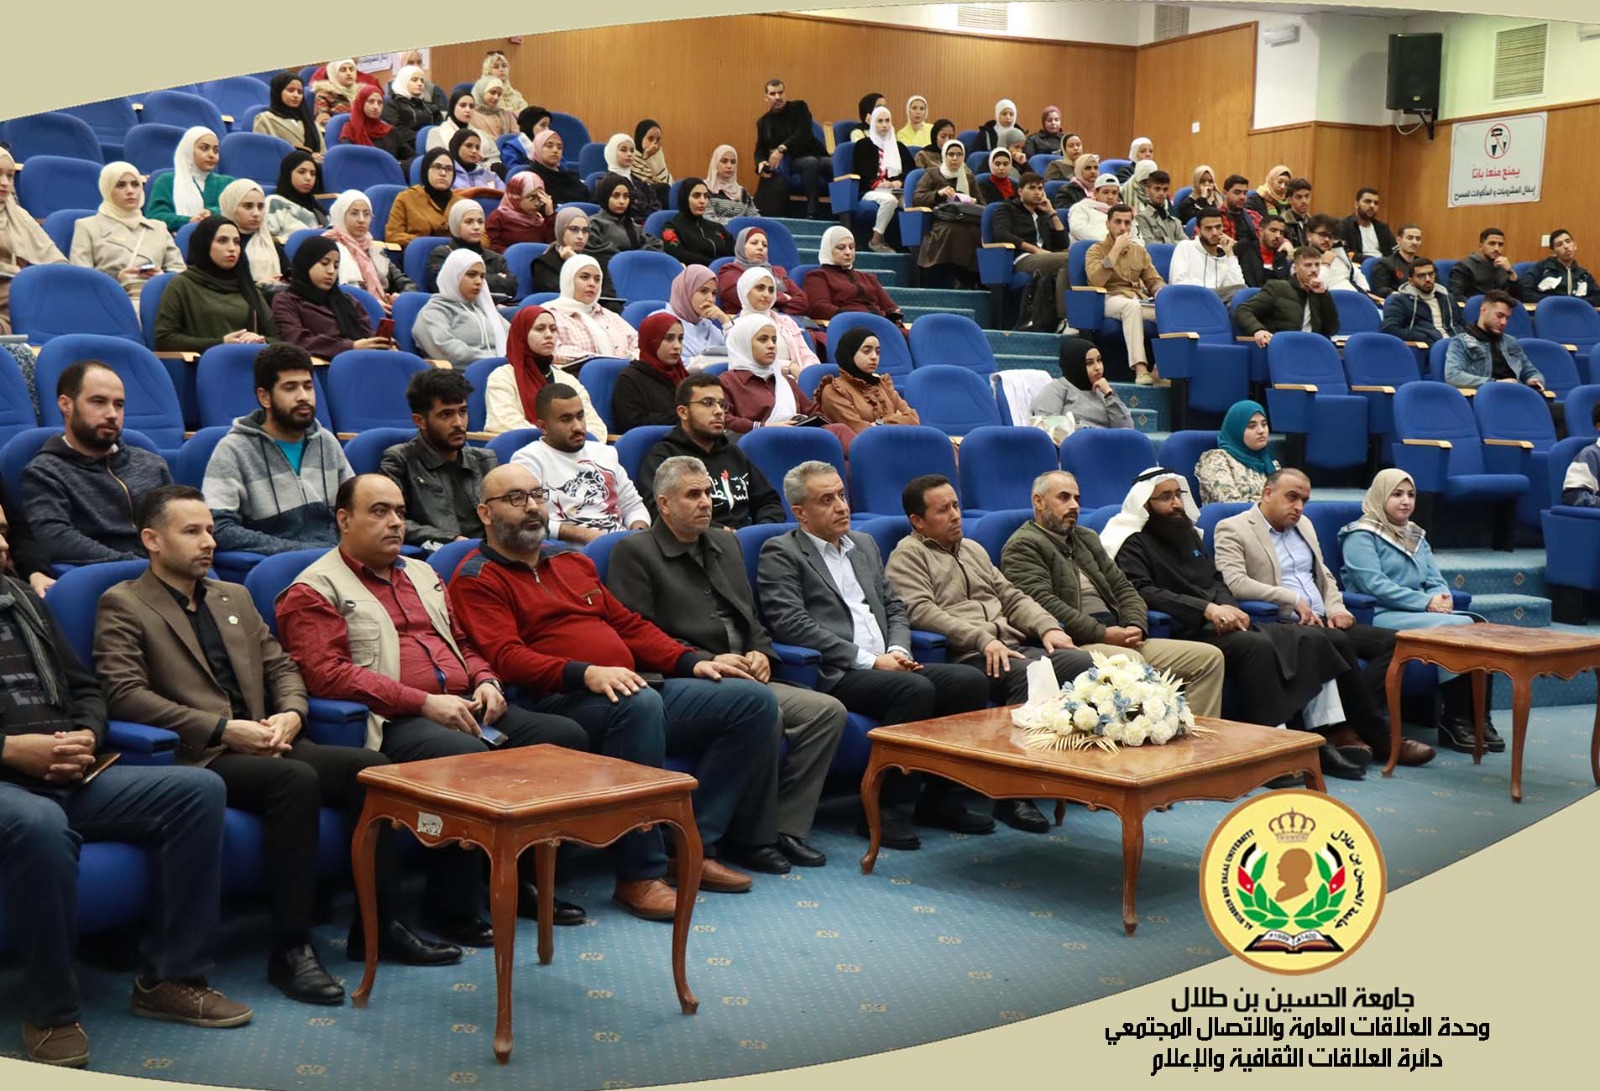 A media symposium entitled (The Biblical Narrative and the Fabrication of History) at Al Hussein Bin Talal University